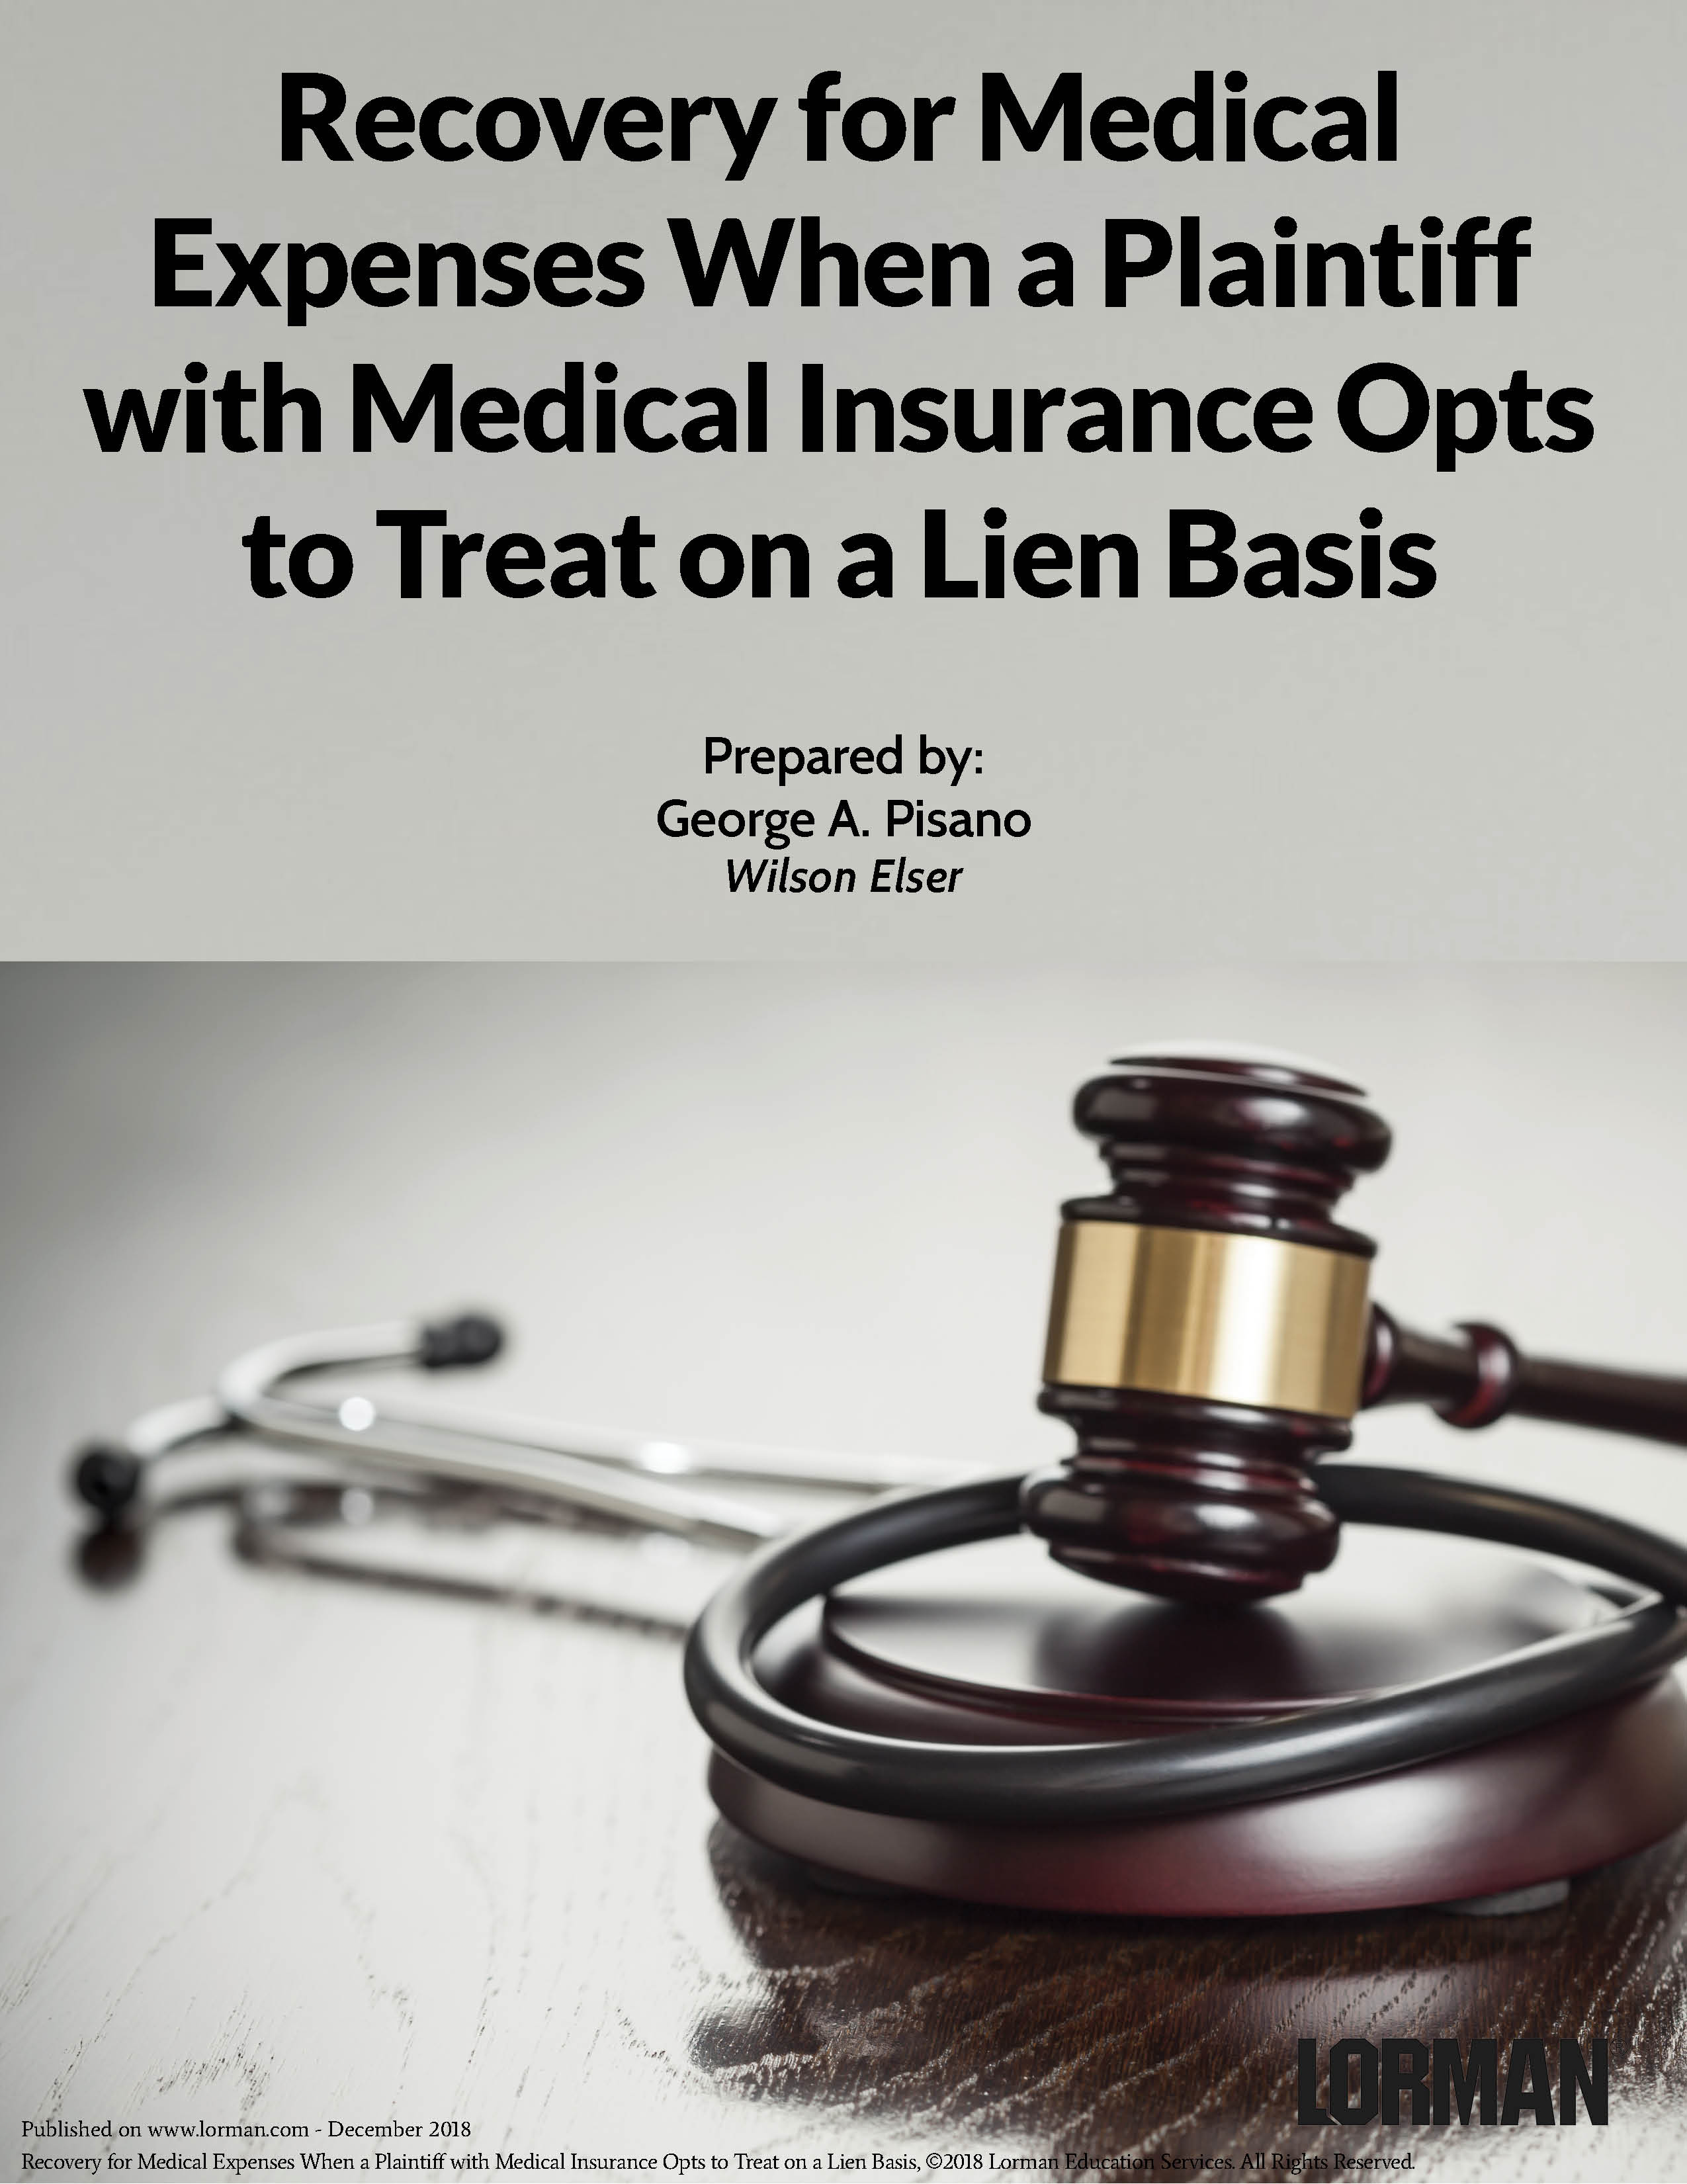 Recovery for Medical Expenses When a Plaintiff with Medical Insurance Opts to Treat on a Lien Basis